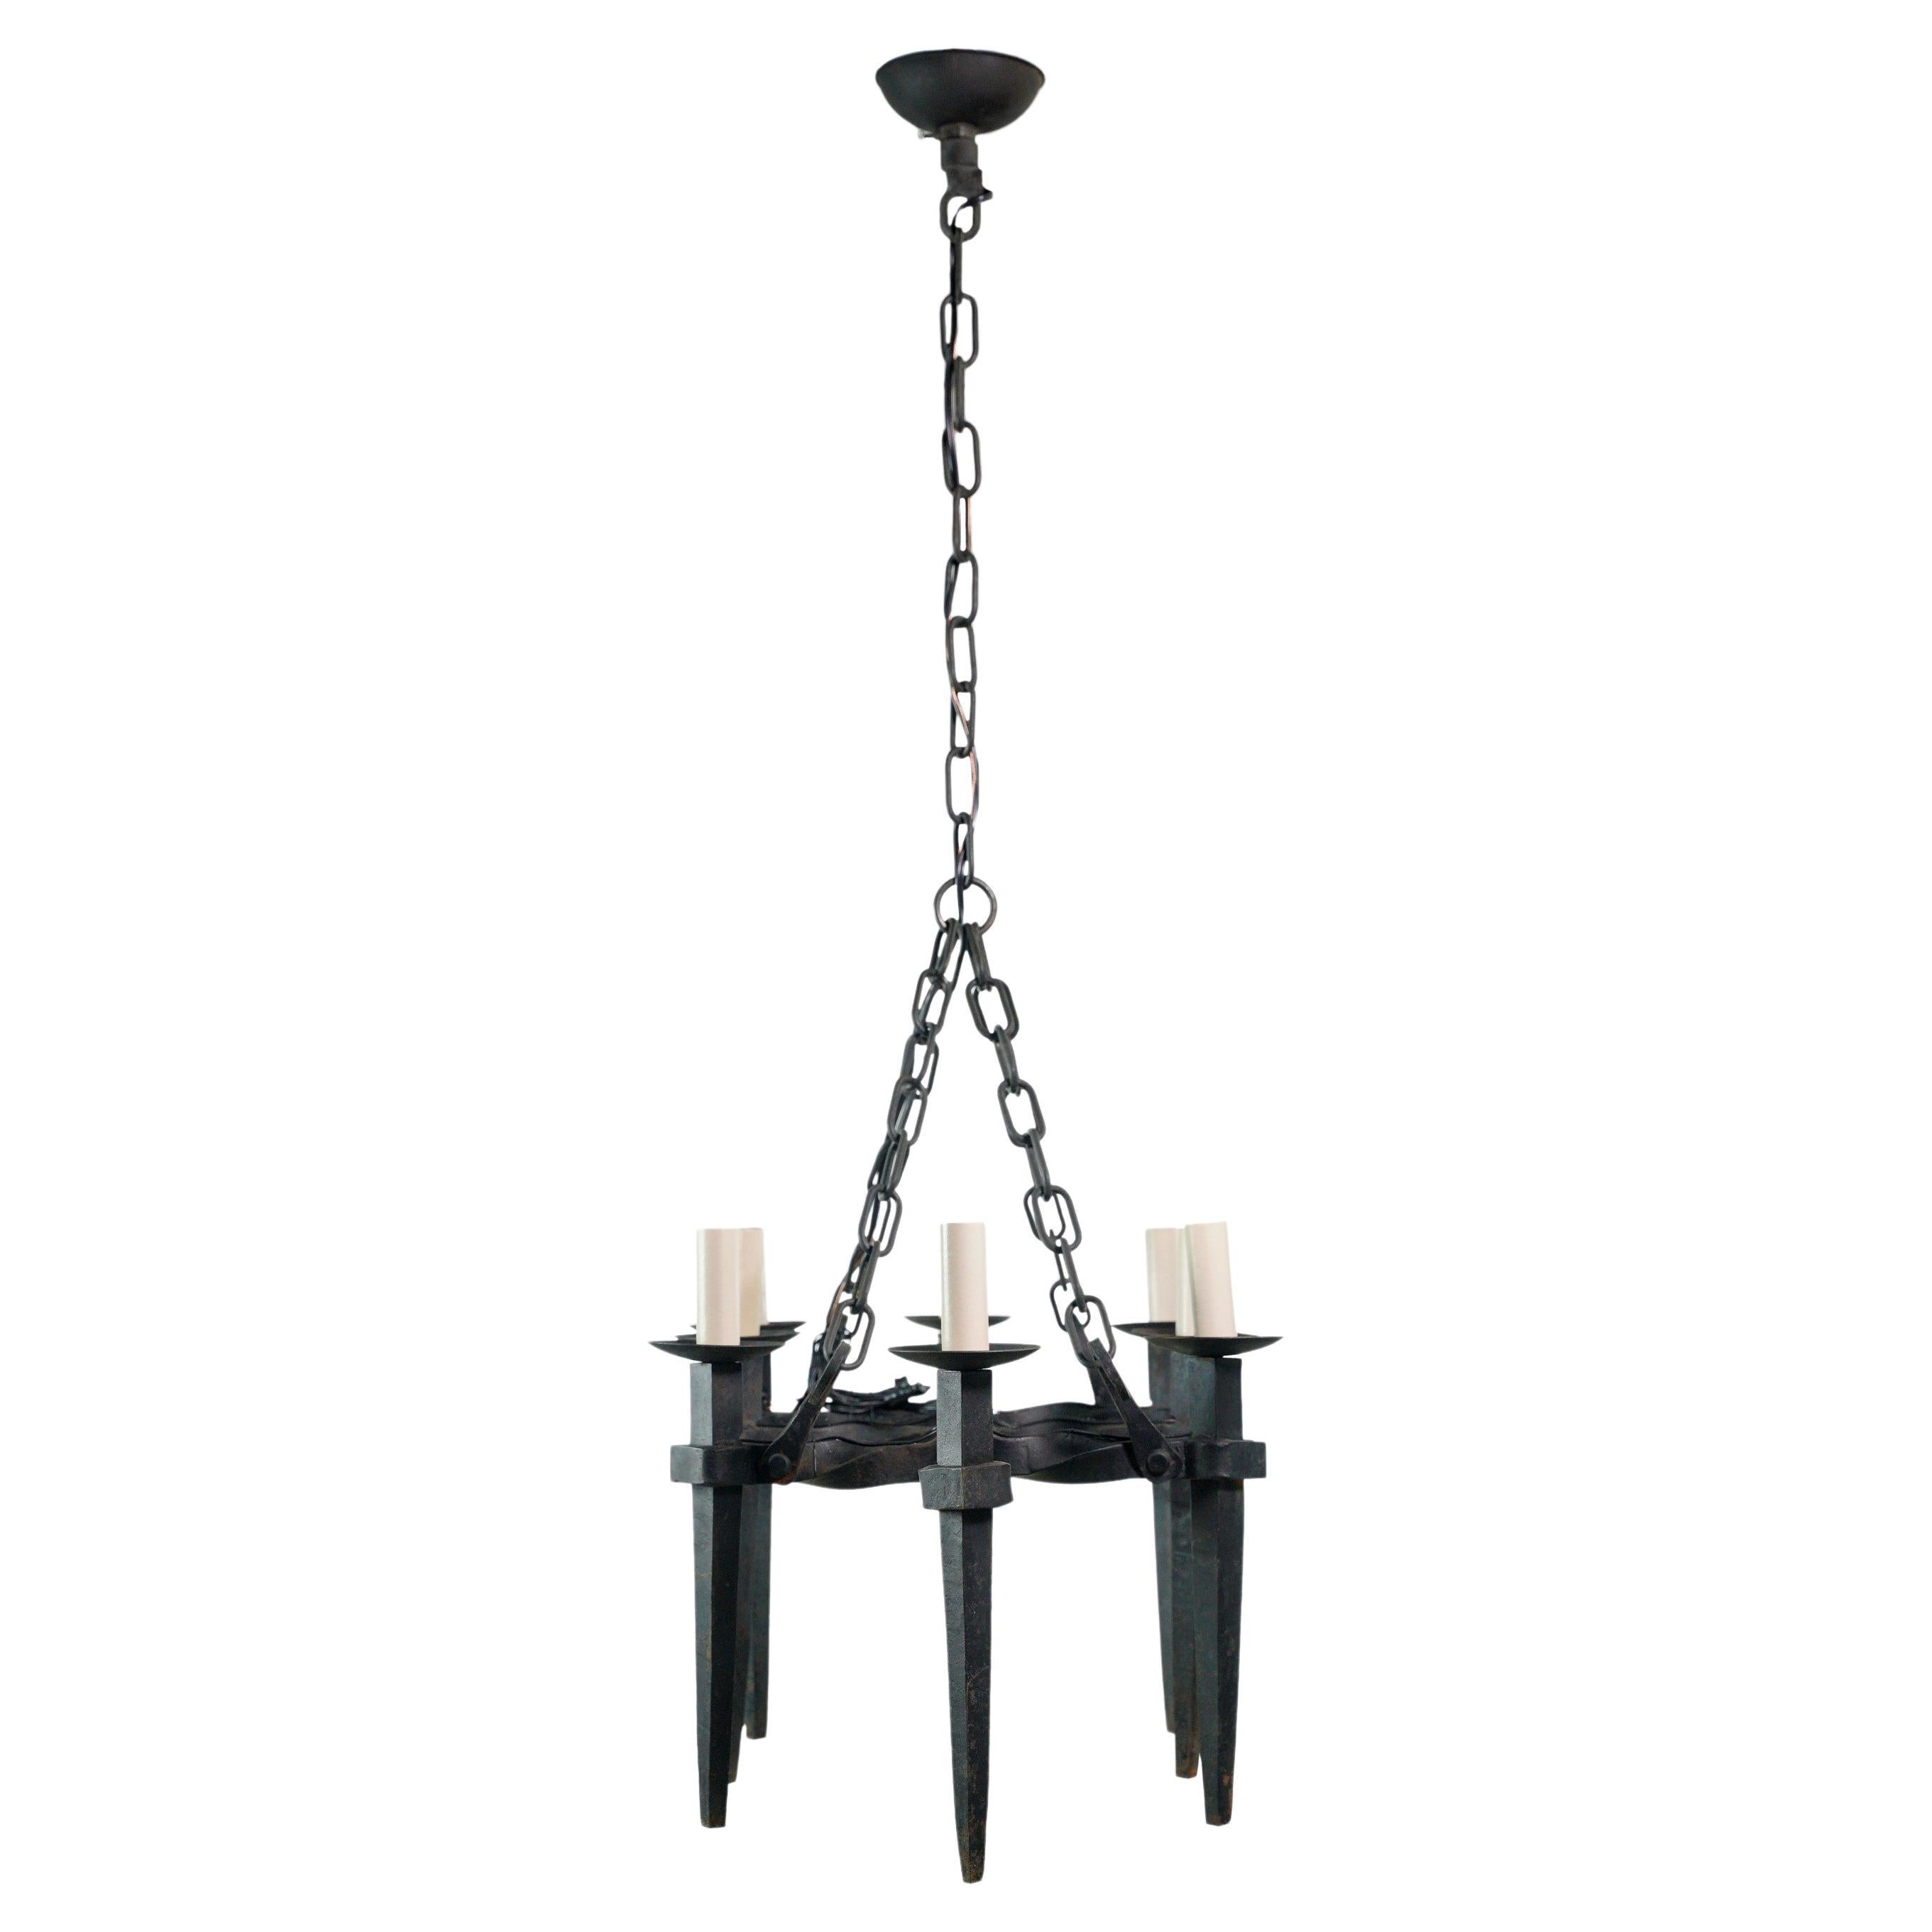 Exquisite antique French chandelier crafted from black wrought iron, featuring eight gracefully curved arms. With its intricate detailing and timeless elegance, this chandelier is a captivating centerpiece that adds a touch of grandeur to any space.